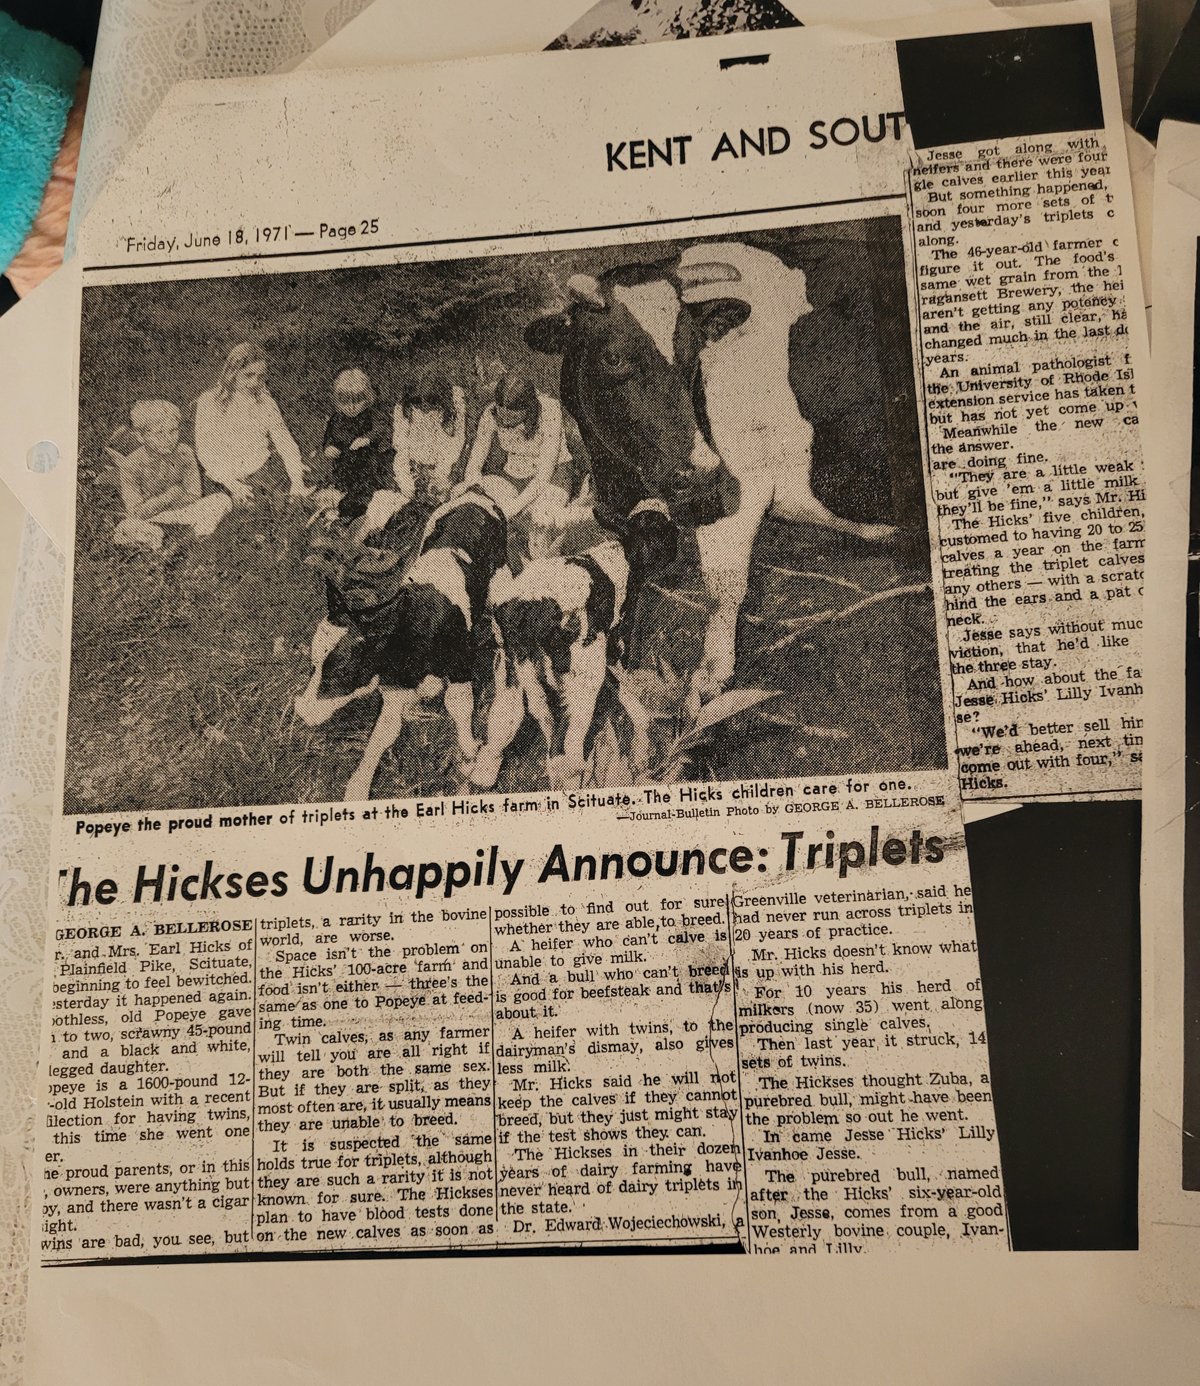 THREE BABY MOOS: One poor mother cow made headlines when it birthed triplets — a rare occurrence for a heifer. The event led to a big story in the Providence Journal, headlined, “The Hickses Unhappily Announce: Triplets.”